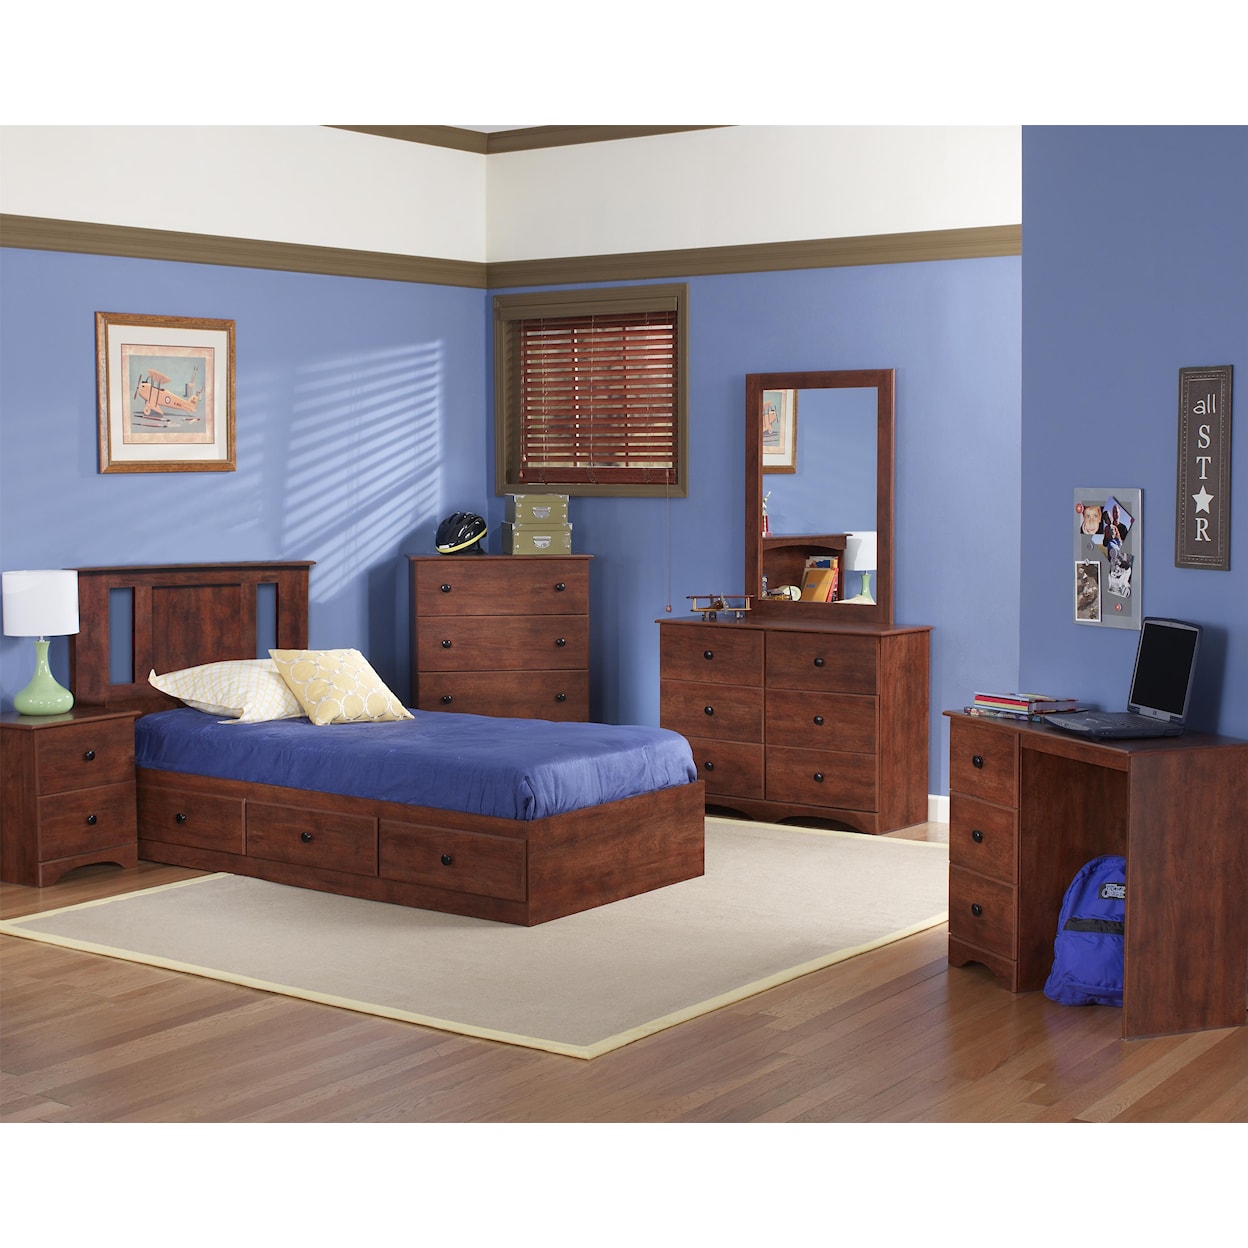 Perdue 11000 Series Twin Panel Mates Bed